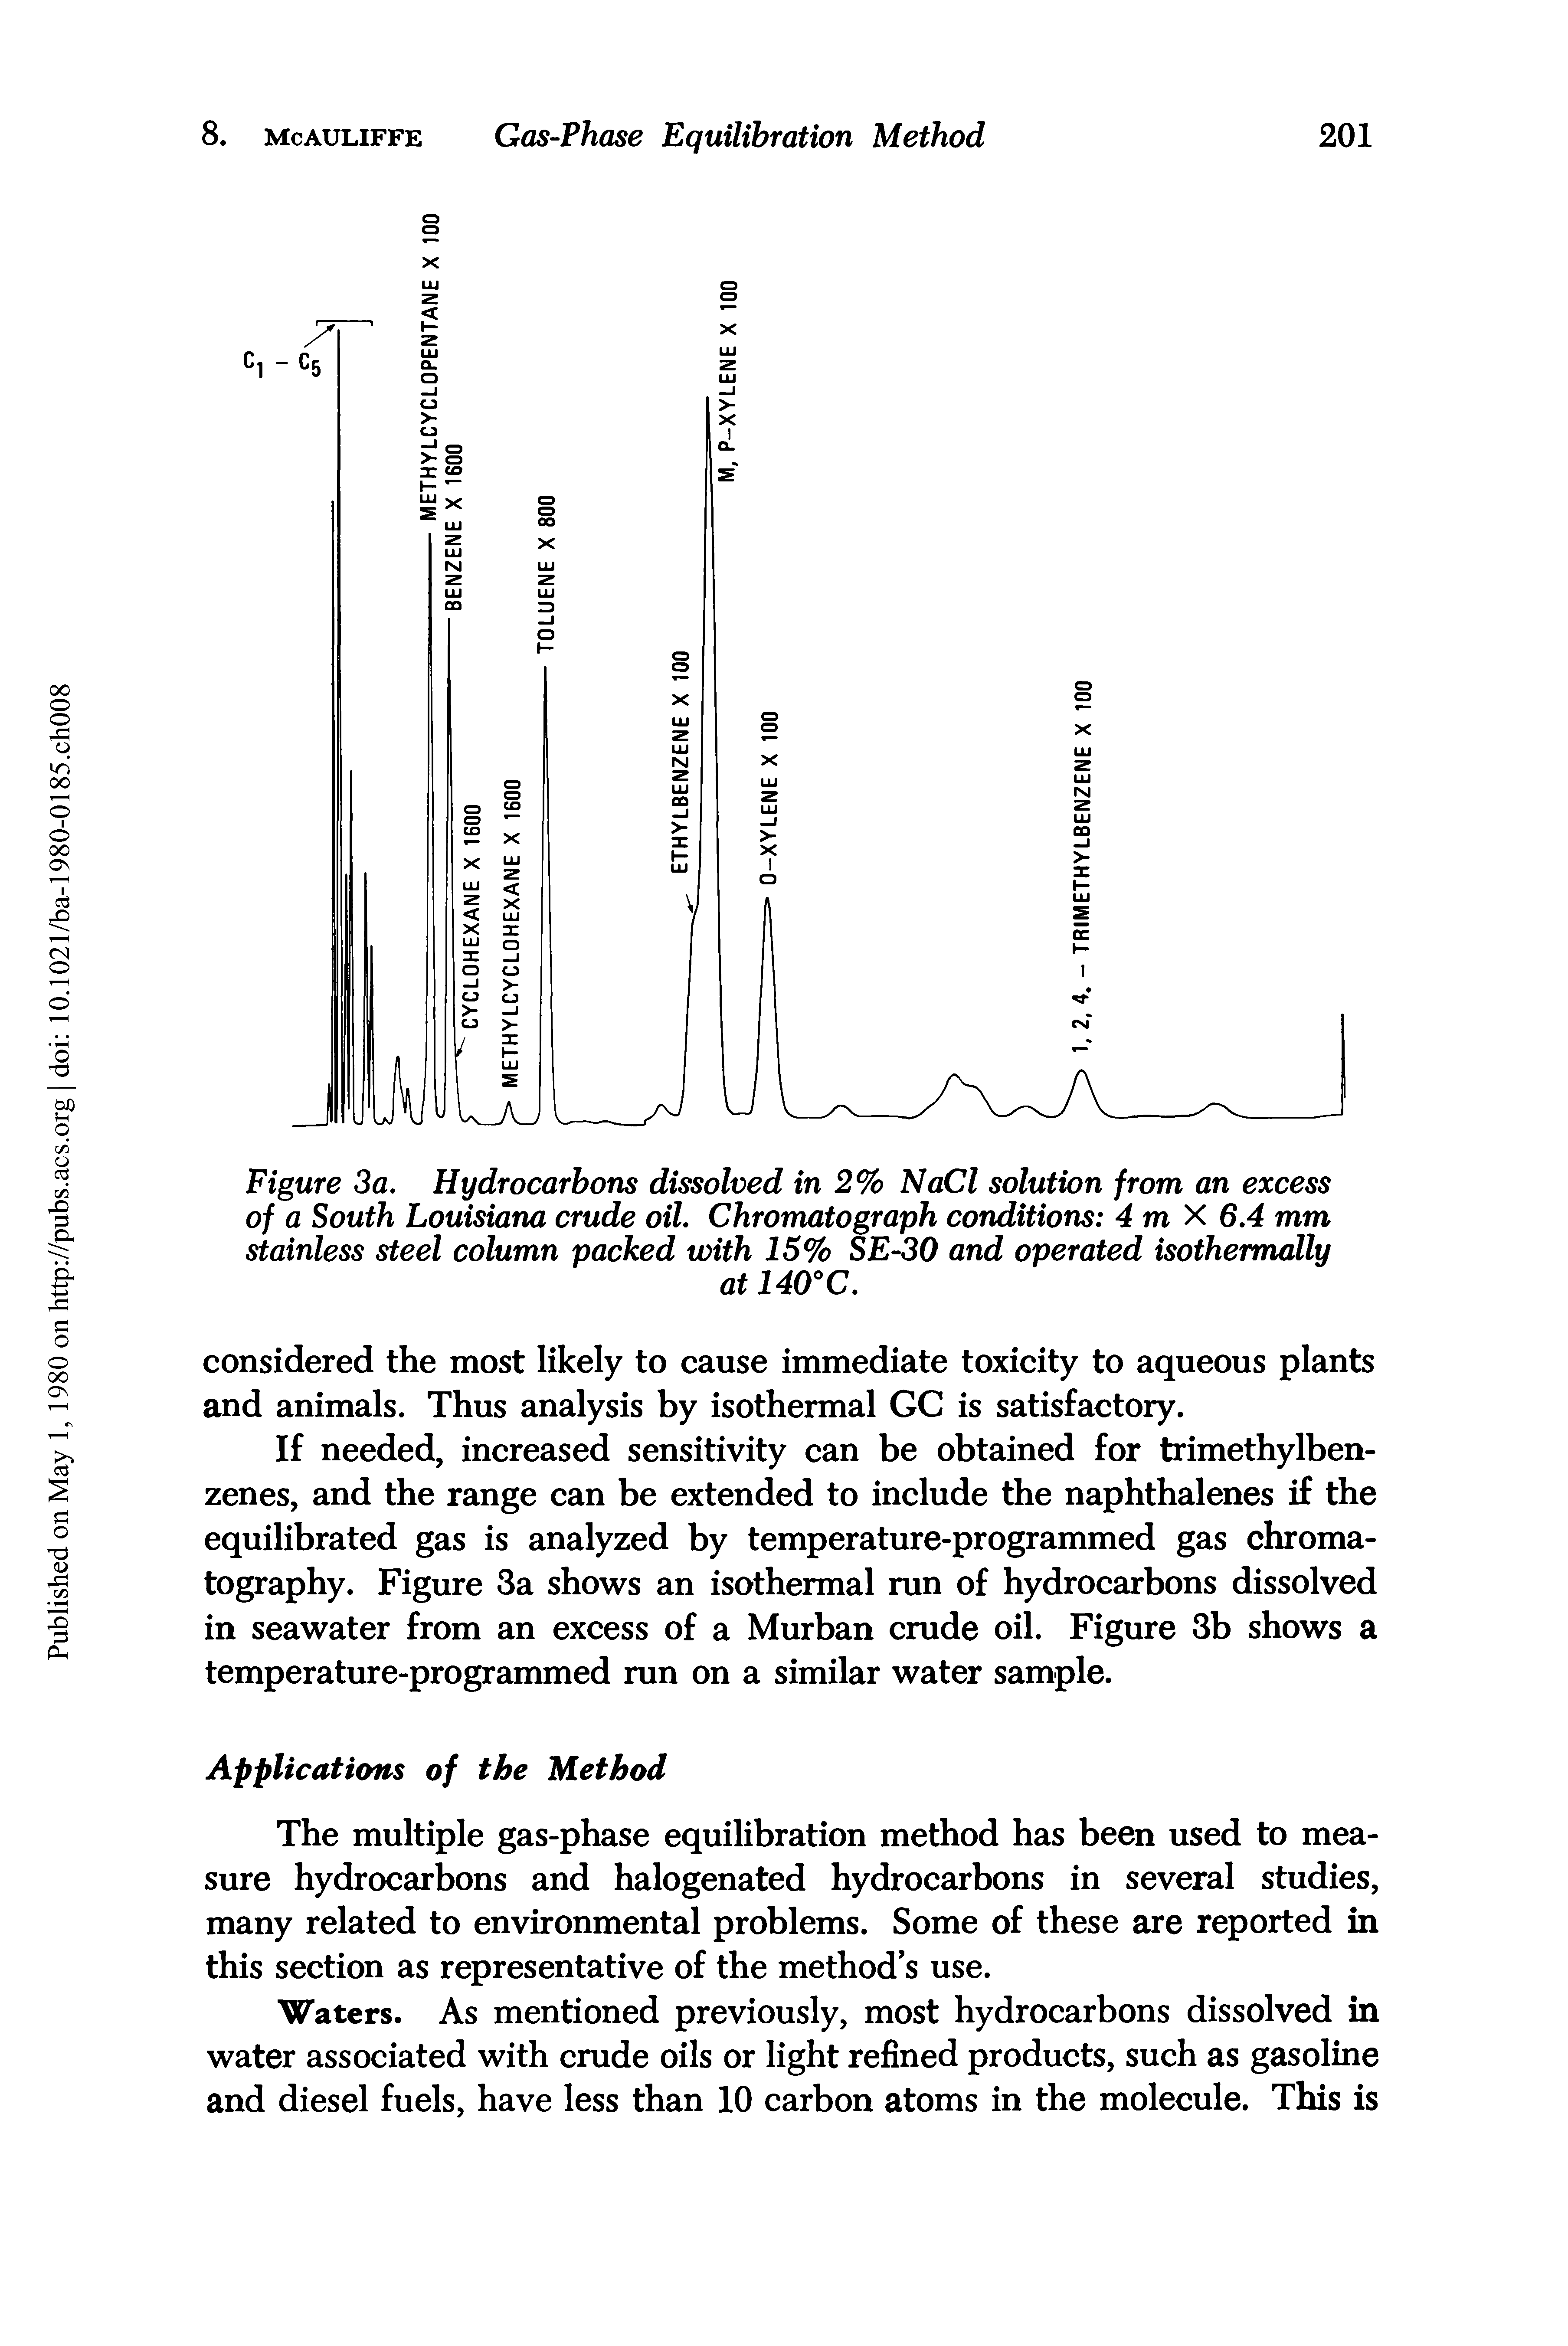 Figure 3a. Hydrocarbons dissolved in 2% NaCl solution from an excess of a South Louisiana crude oil. Chromatograph conditions 4 m X 6.4 mm stainless steel column packed with 15% SE-30 and operated isothermally...